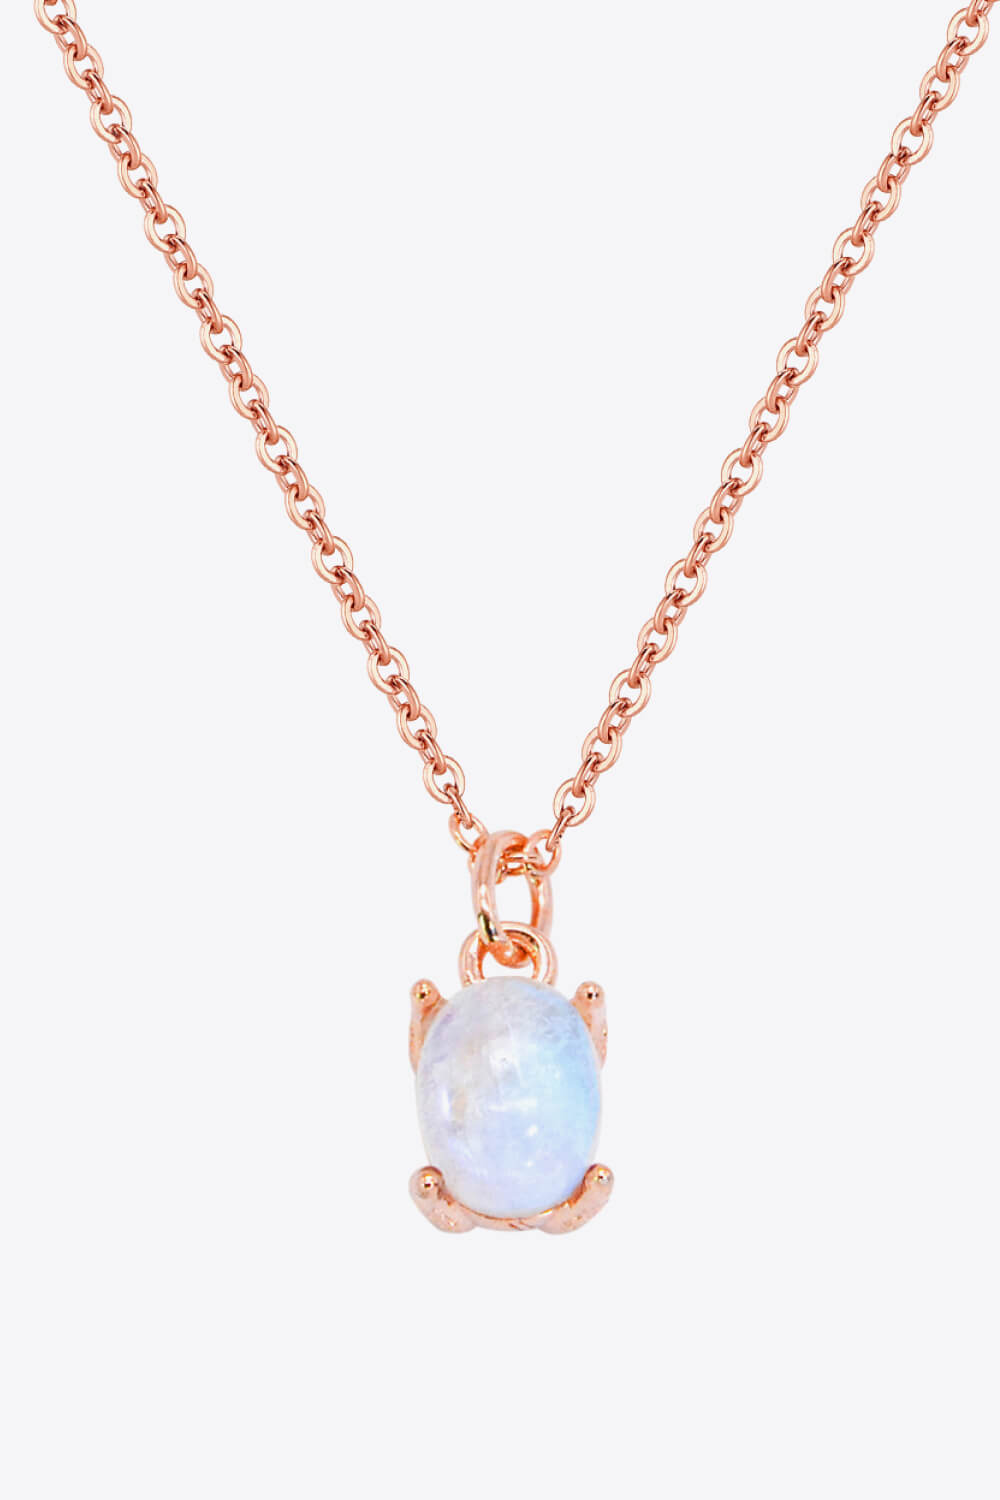 Adorn yourself with celestial elegance with our Silver Moonstone Pendant. Explore the magic of moonstone. Shop now for timeless beauty.